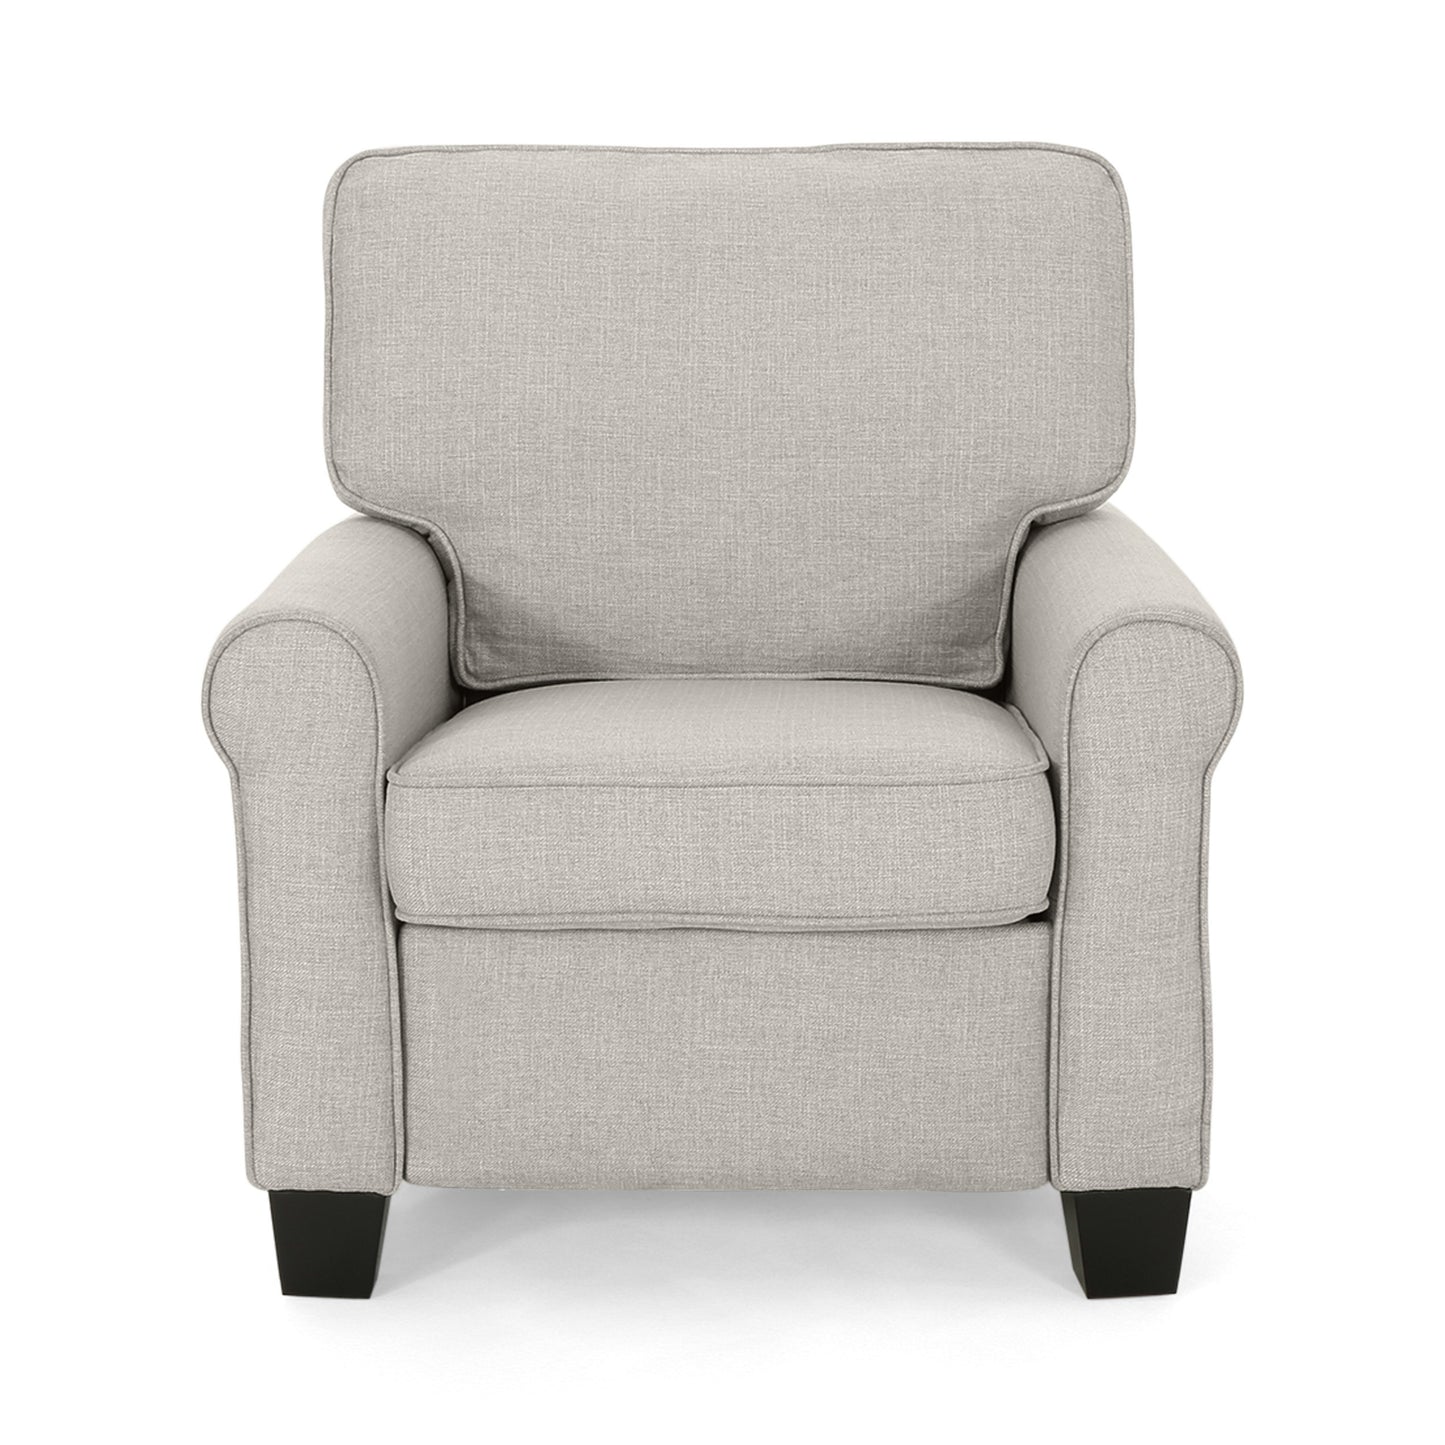 Patricia Contemporary Scrolled Arm Upholstered Fabric Club Chair w/ Tonal Piping